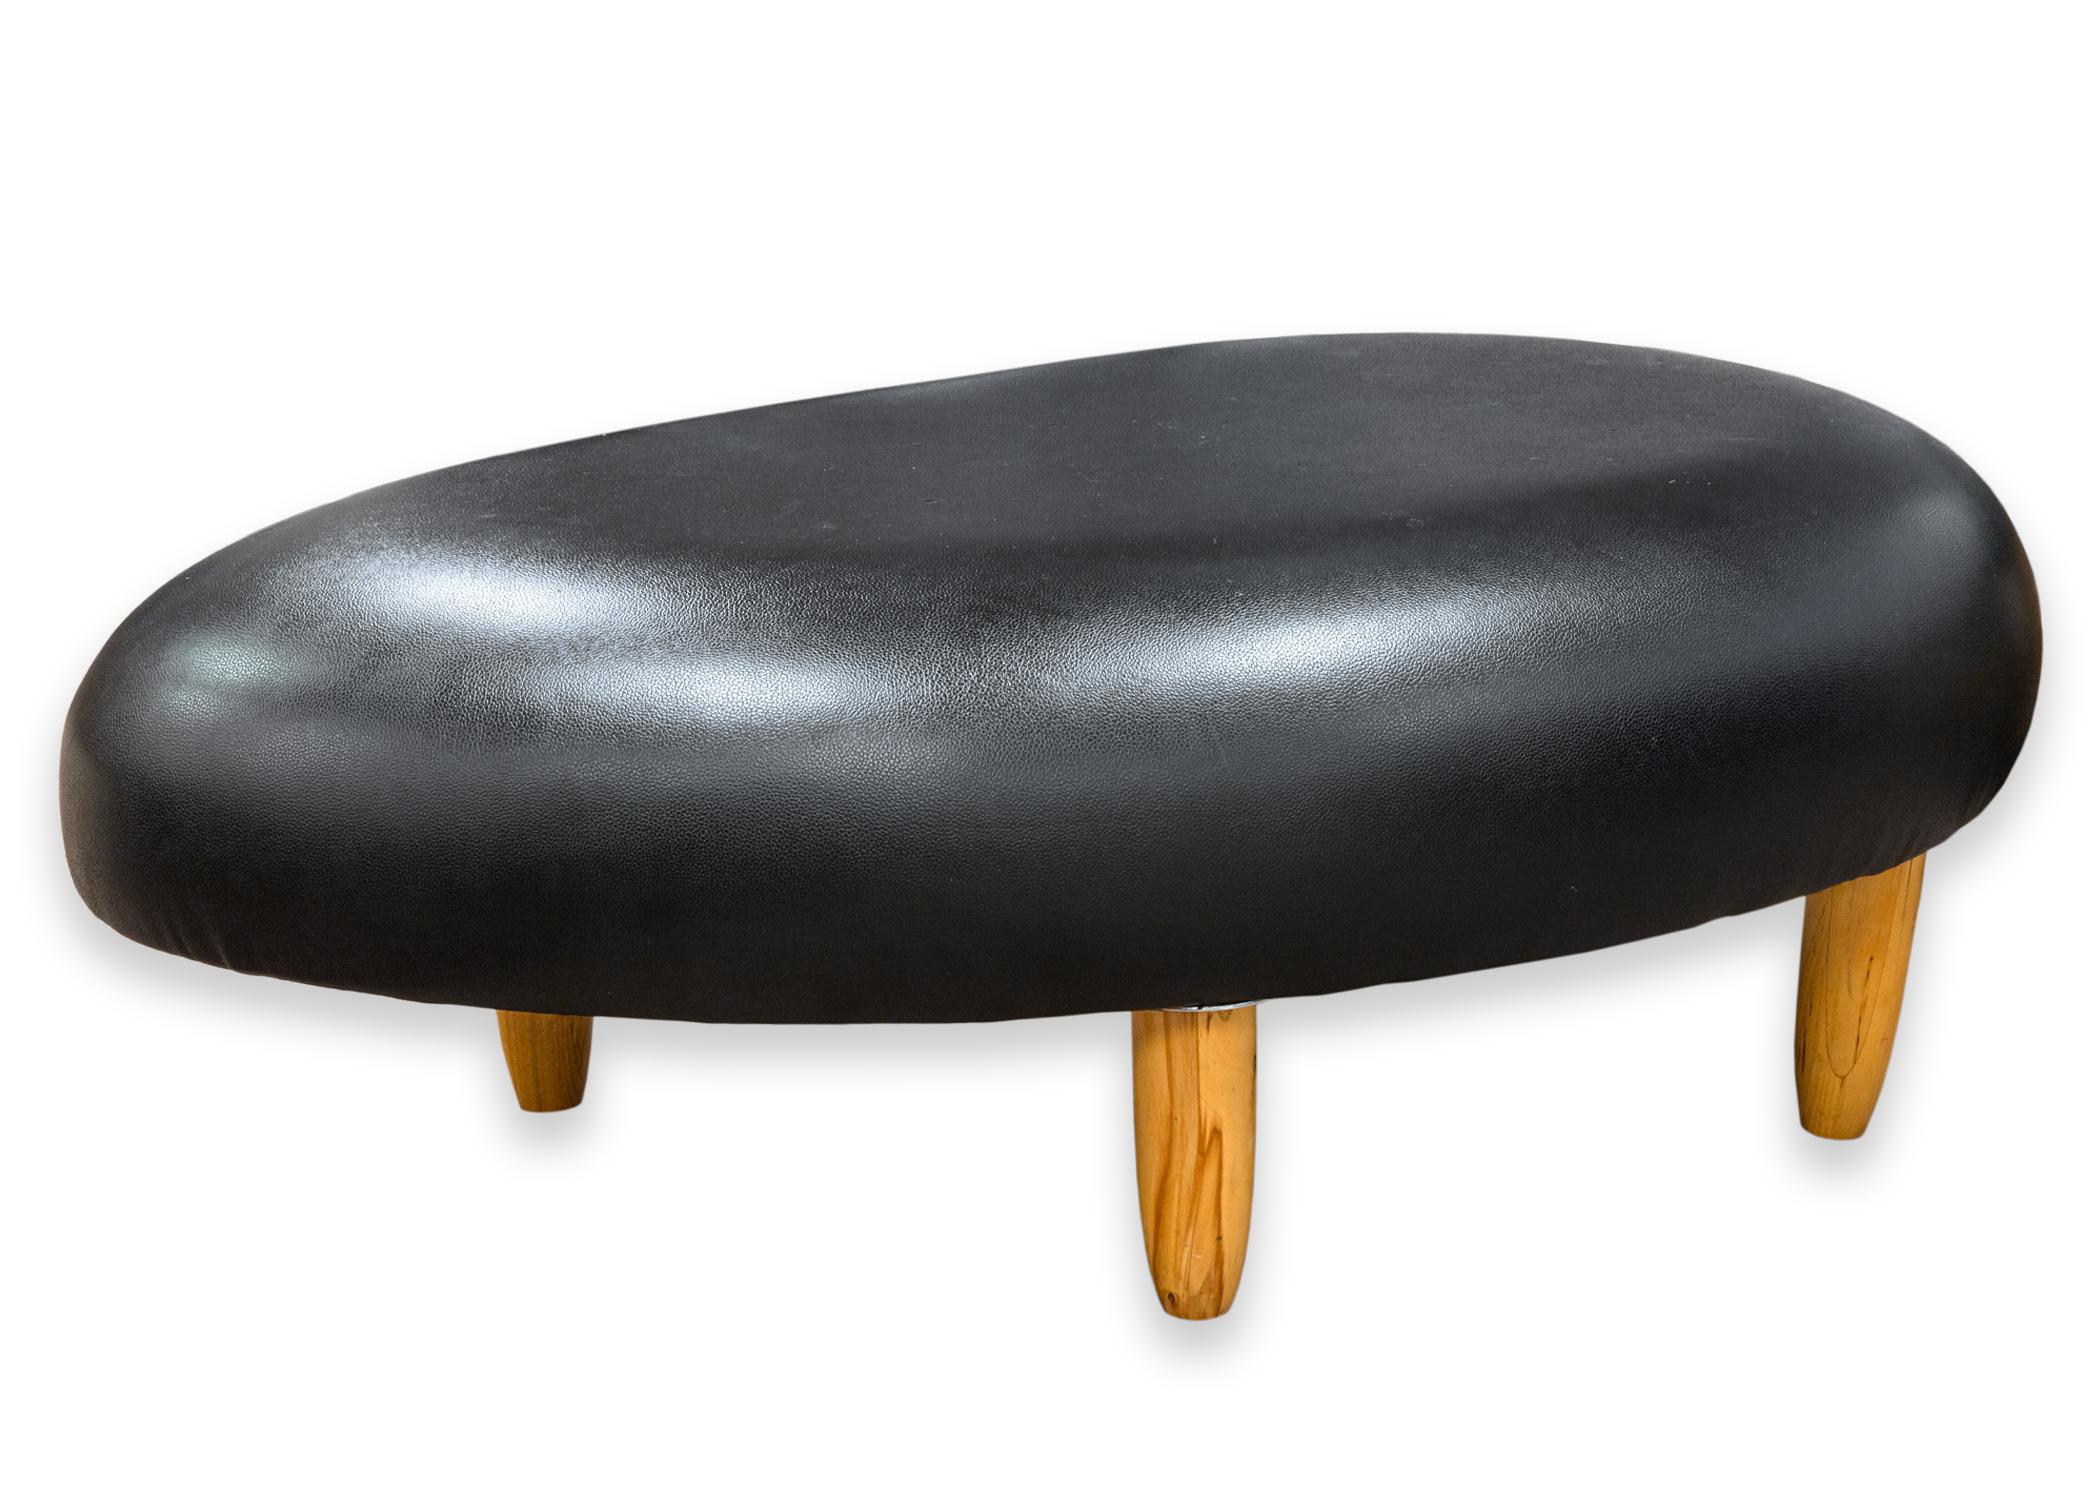 Isamu Noguchi Style Freeform Black Leather Sofa and Ottoman Attributed to Vitra In Good Condition For Sale In Keego Harbor, MI